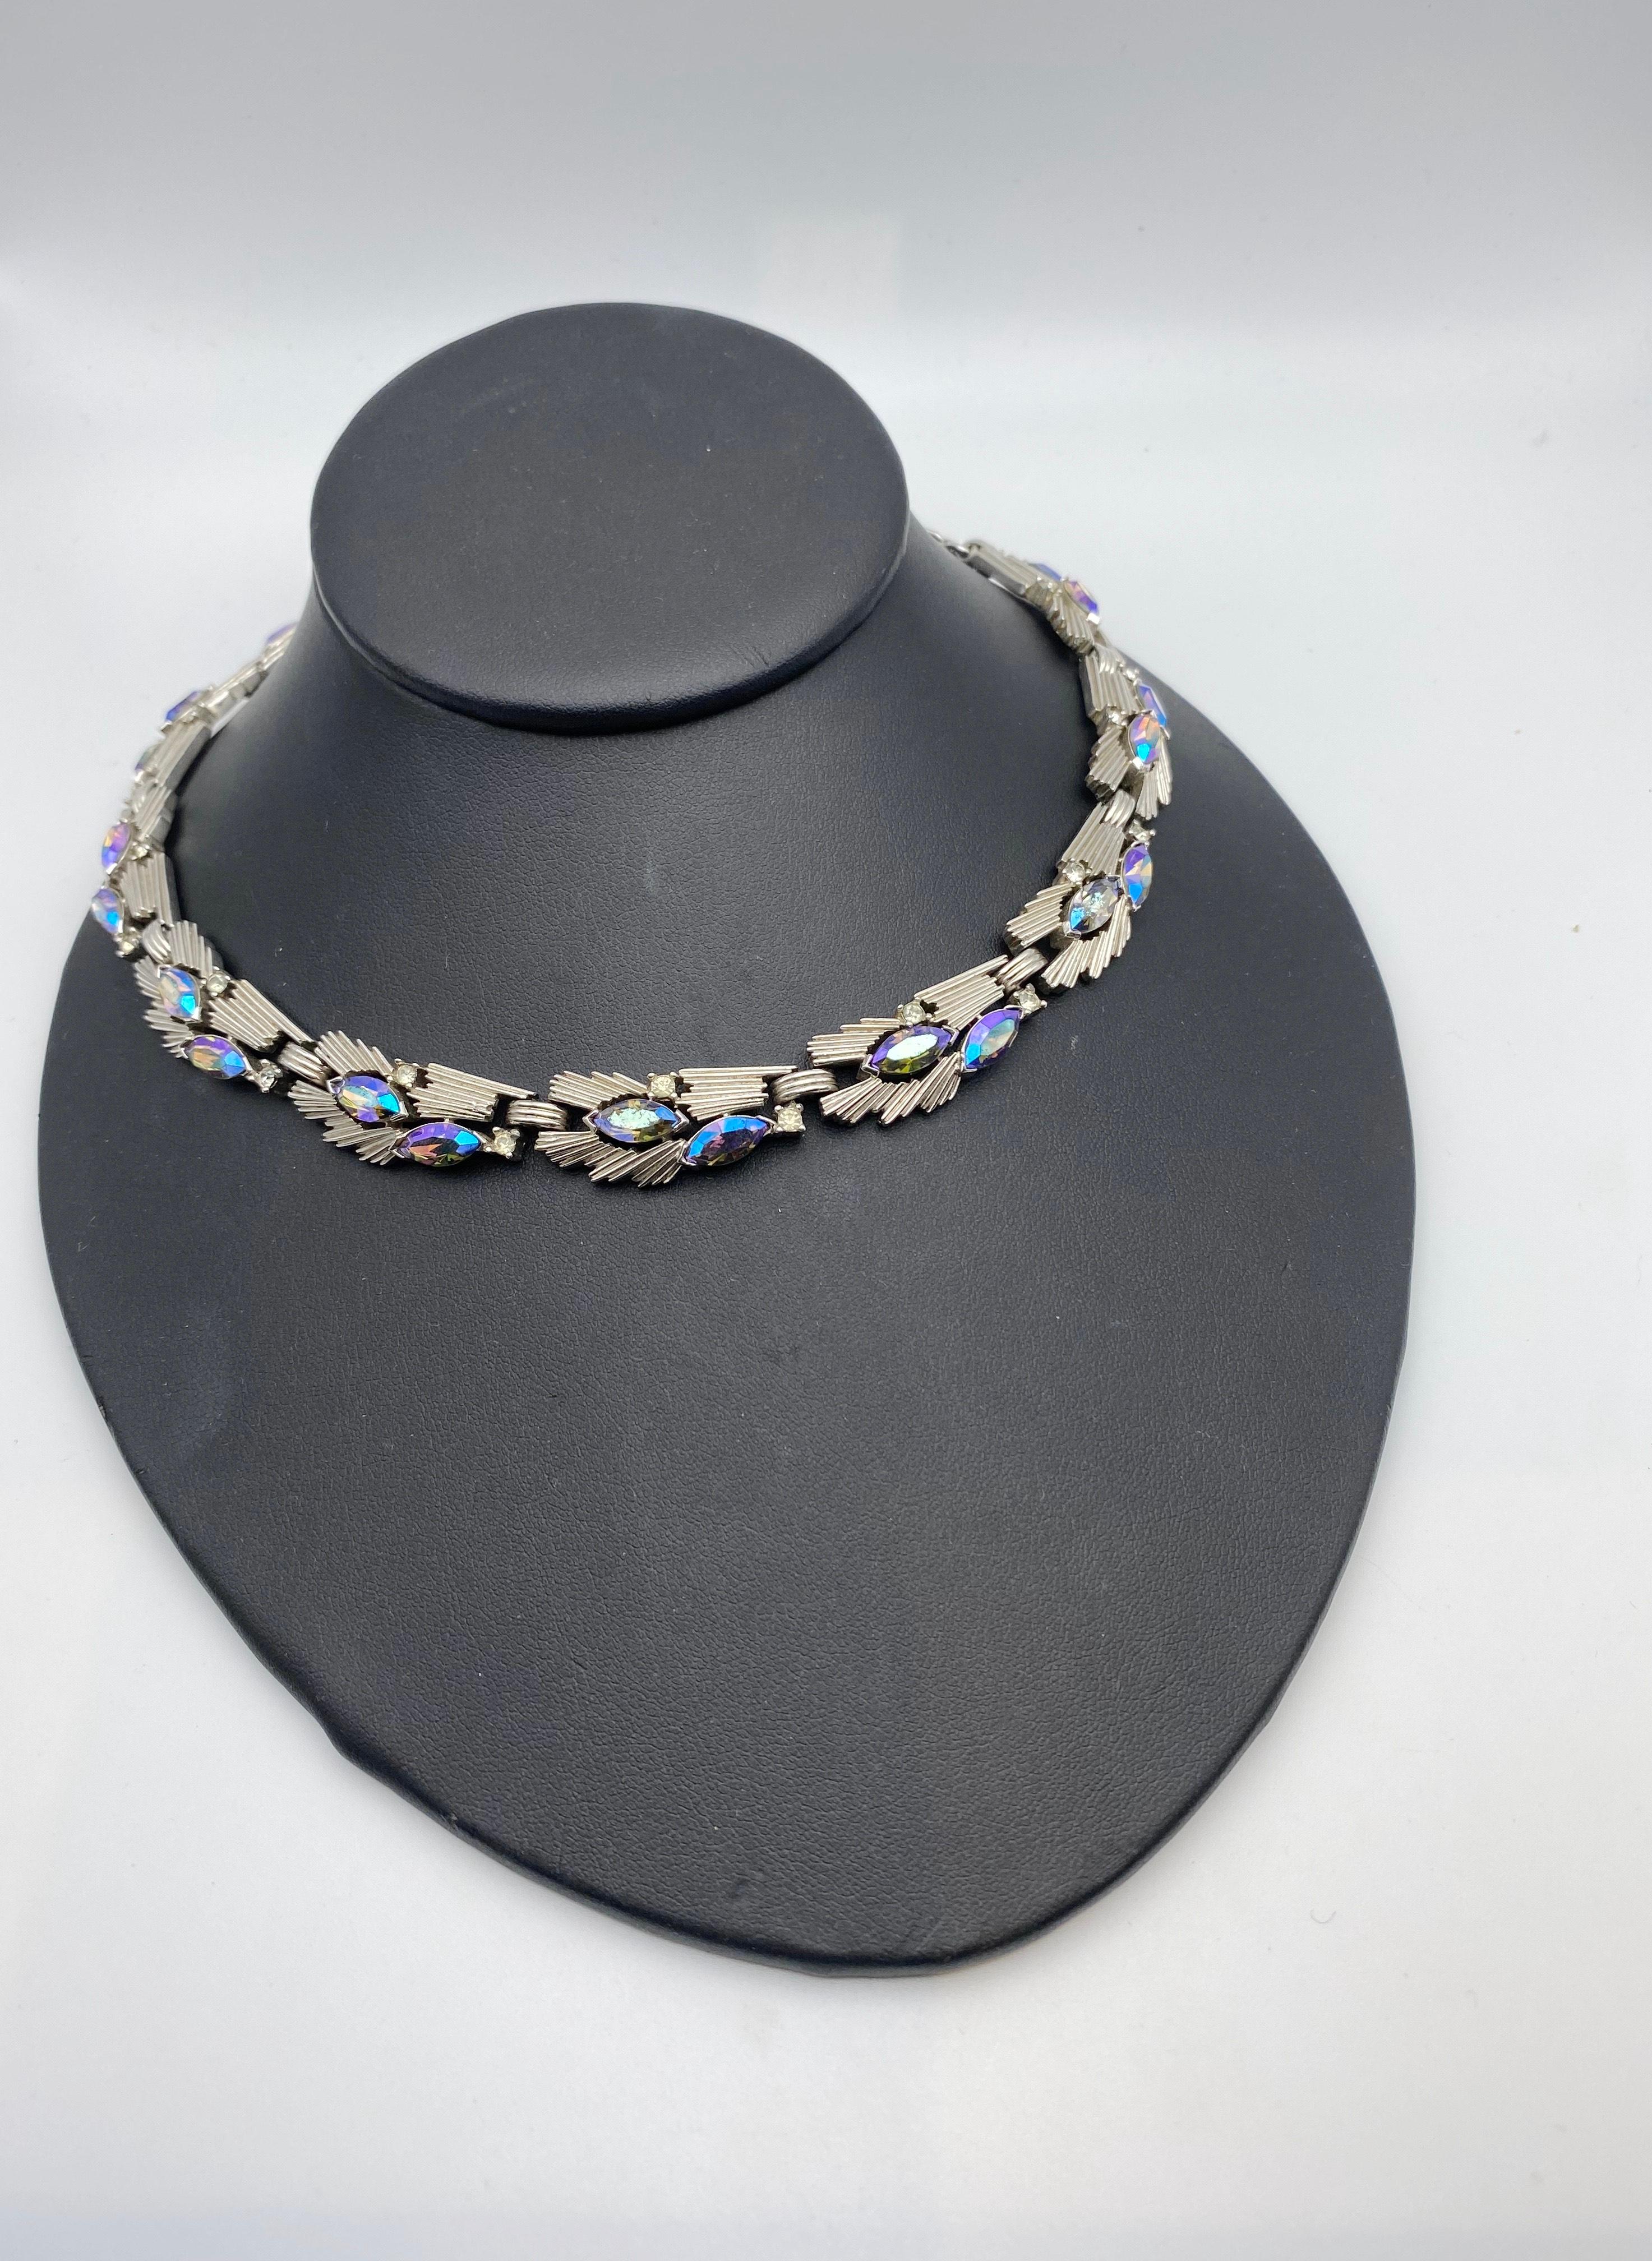 A stunning, extremely rare to find, modernist style Trifari necklace. Featuring textured silvertone and Aurora Borealis navette, multi-faceted crystals. An excellent piece to mark a special occasion or gift for a loved one.  